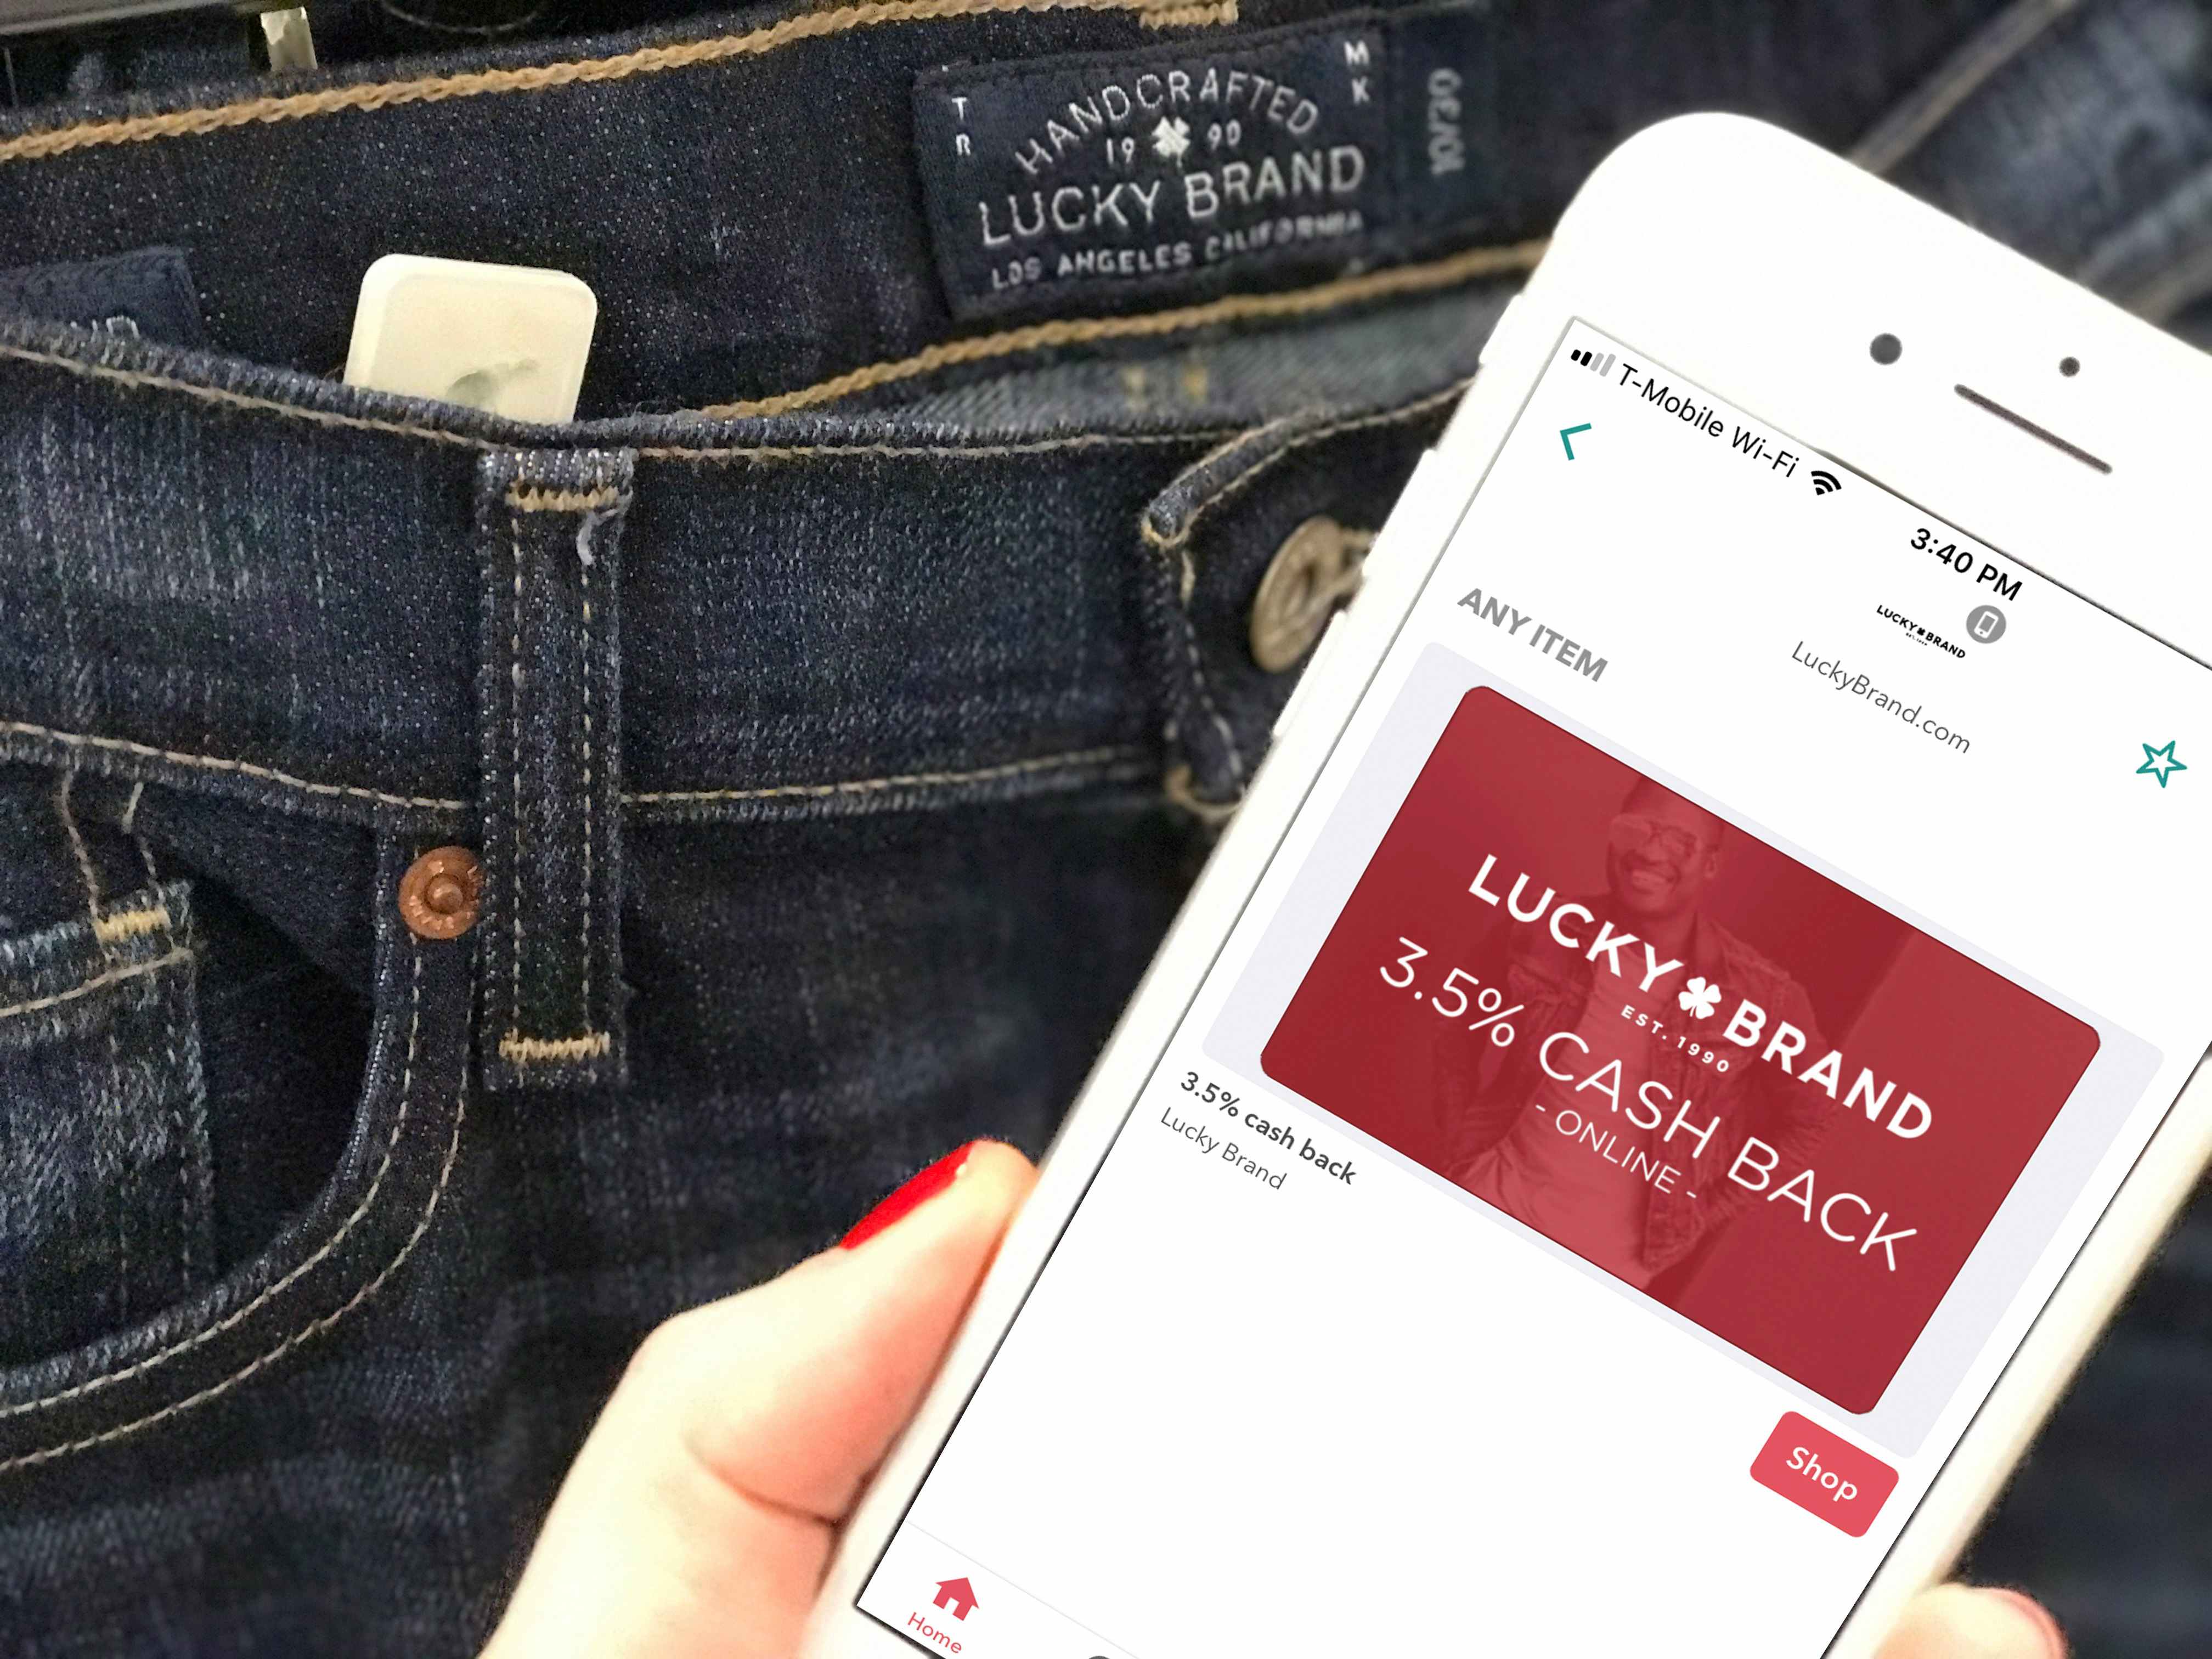 6. Save up to 67% when you shop for Lucky jeans through Ibotta. (For real!)